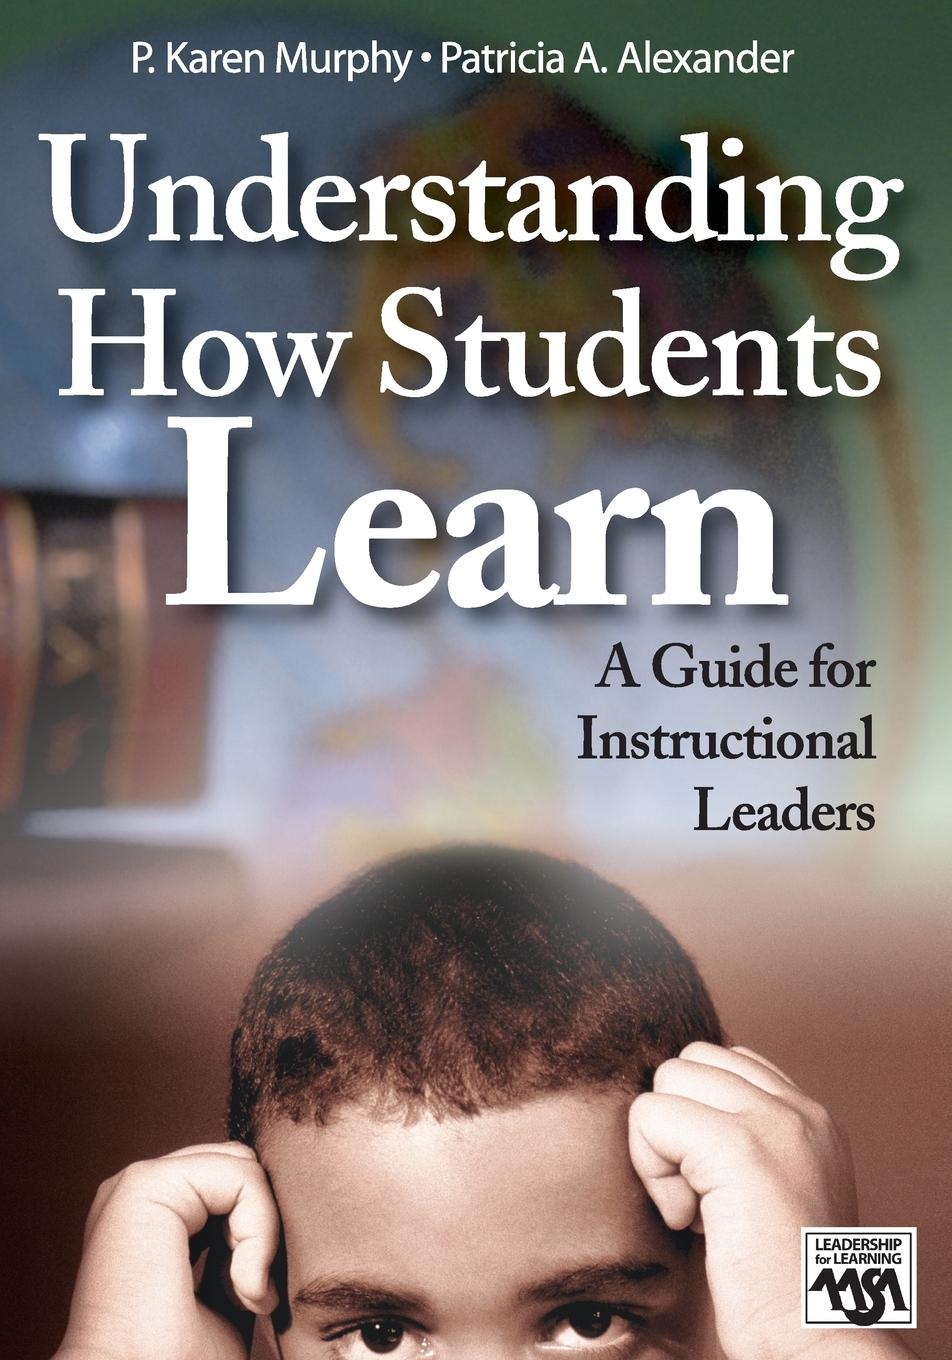 Understanding How Students Learn: A Guide for Instructional Leaders - Murphy, P. Karen Alexander, Patricia A.